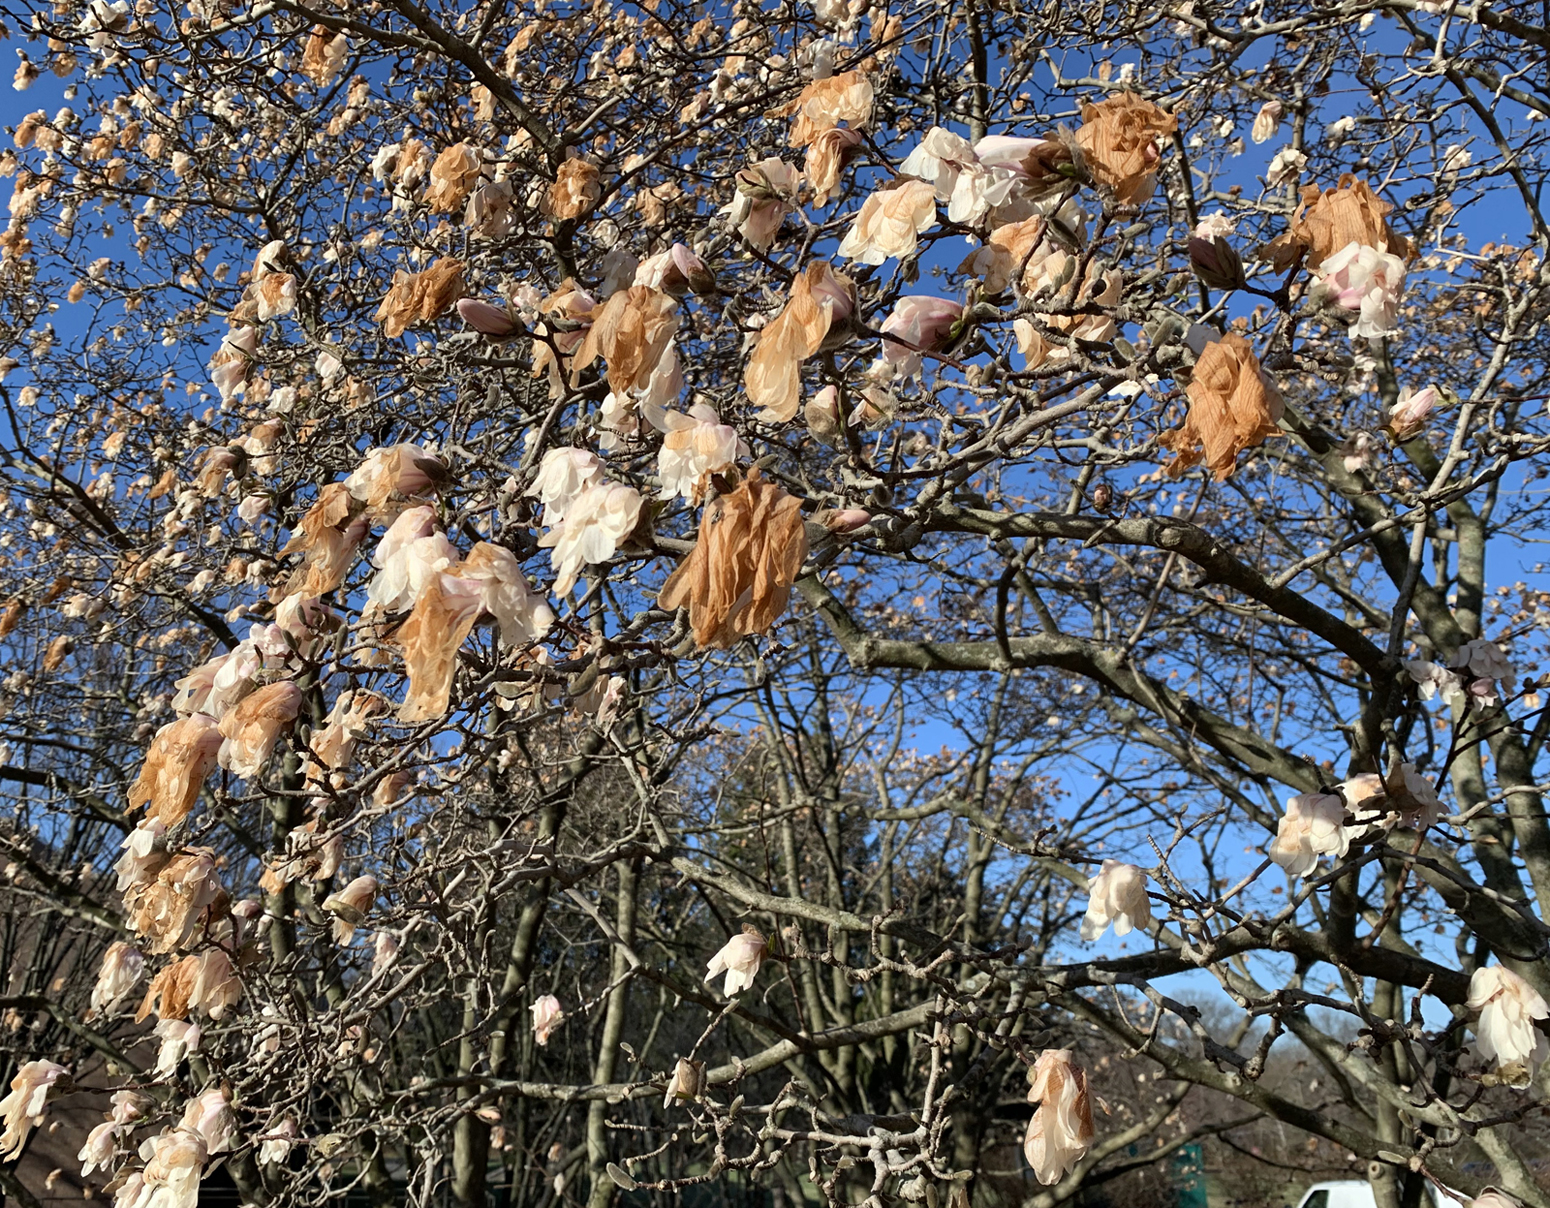 Damaged magnolia flowers on March 29th at Rutgers University Livingston Campus in Piscataway